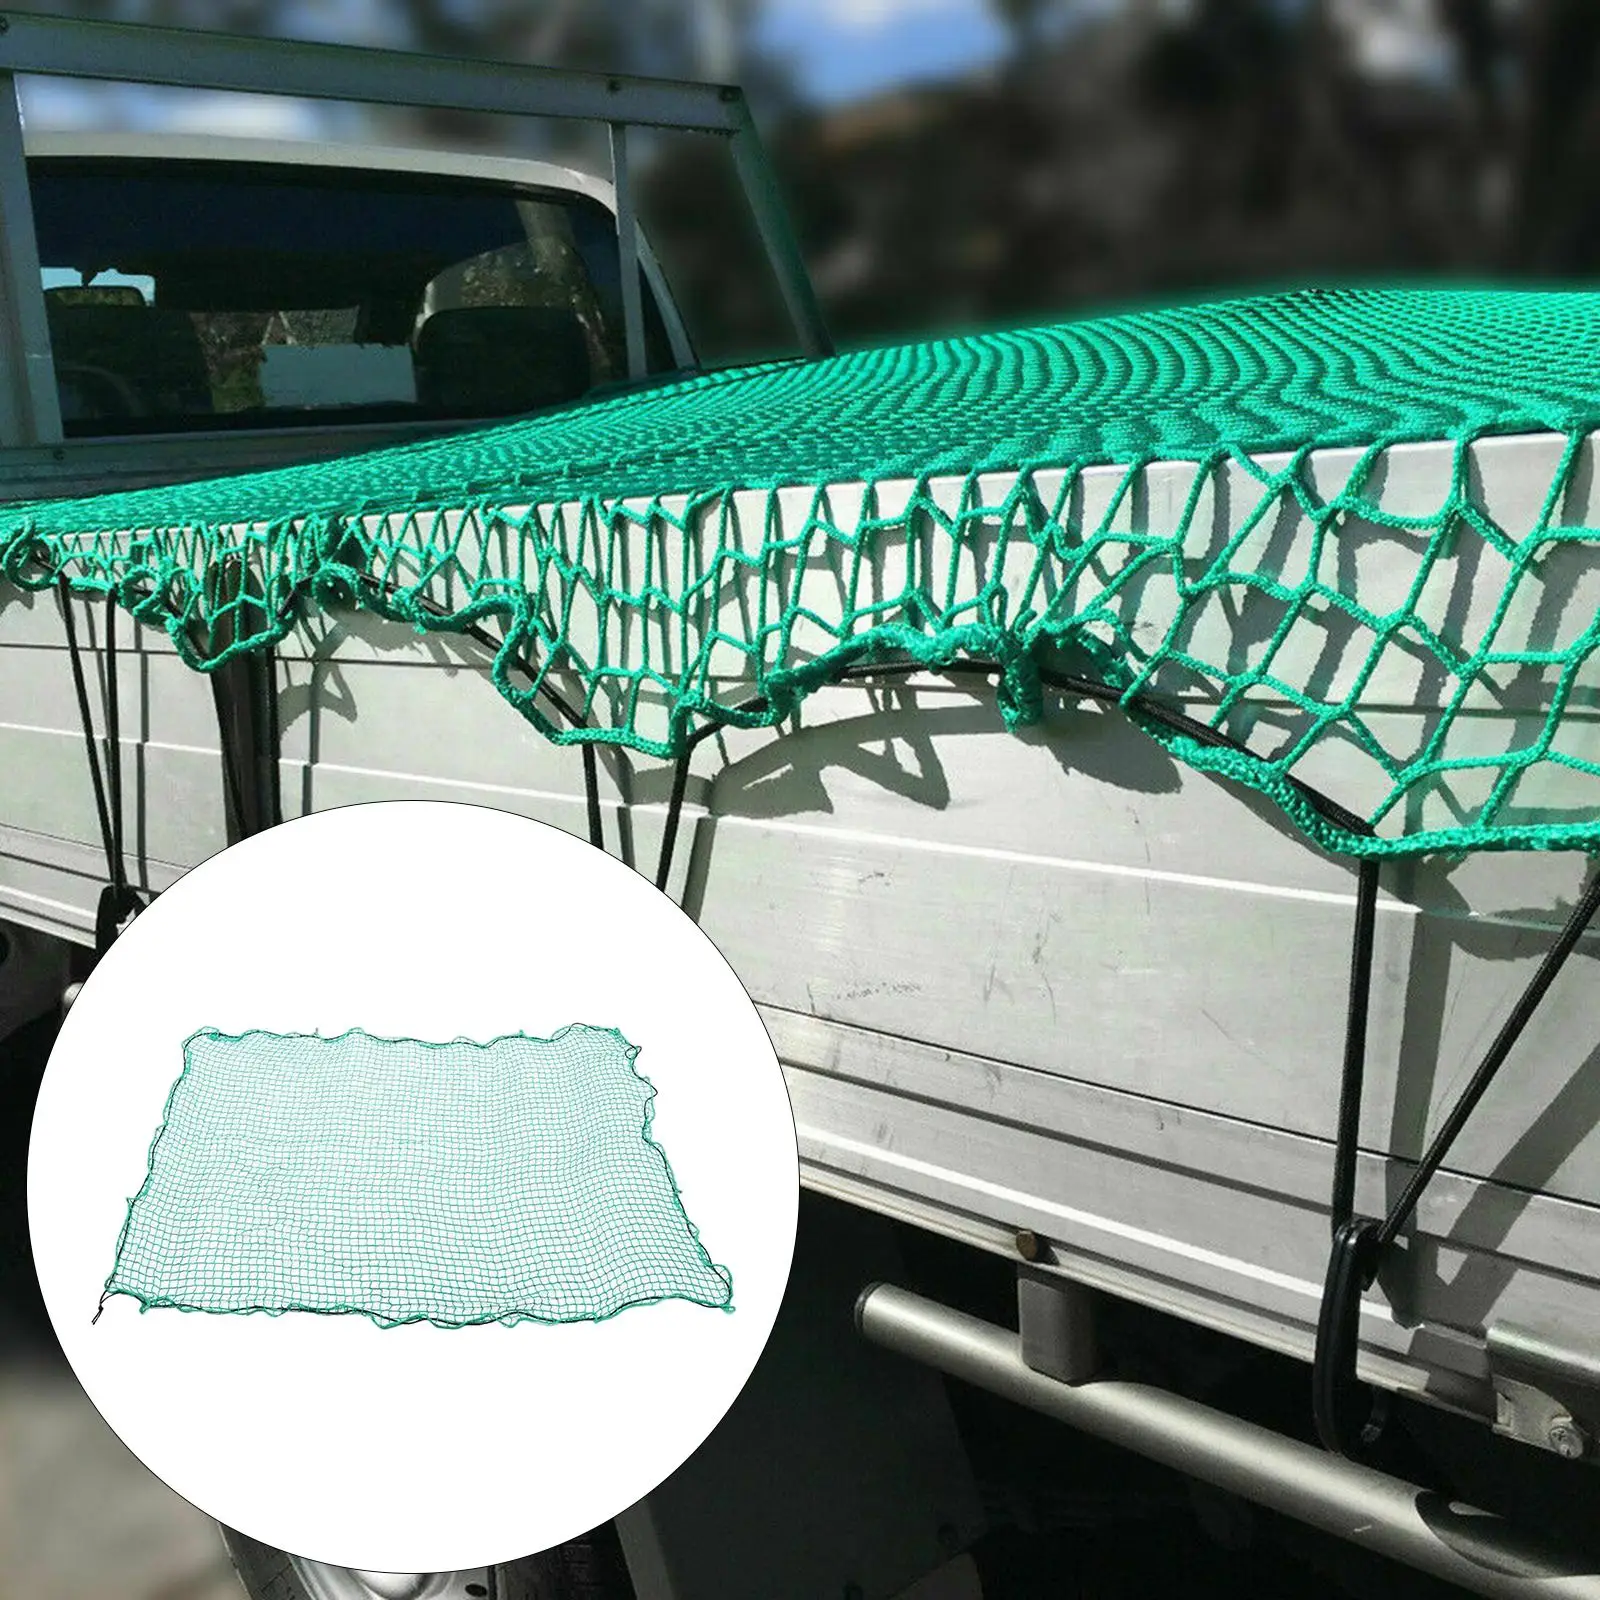 Heavy Duty Truck Bed Cargo Net 6.5` x 9.8` Adjustable Mesh Net Stretchable Carabiners Pickup Car Storage Net Fit for Trailer